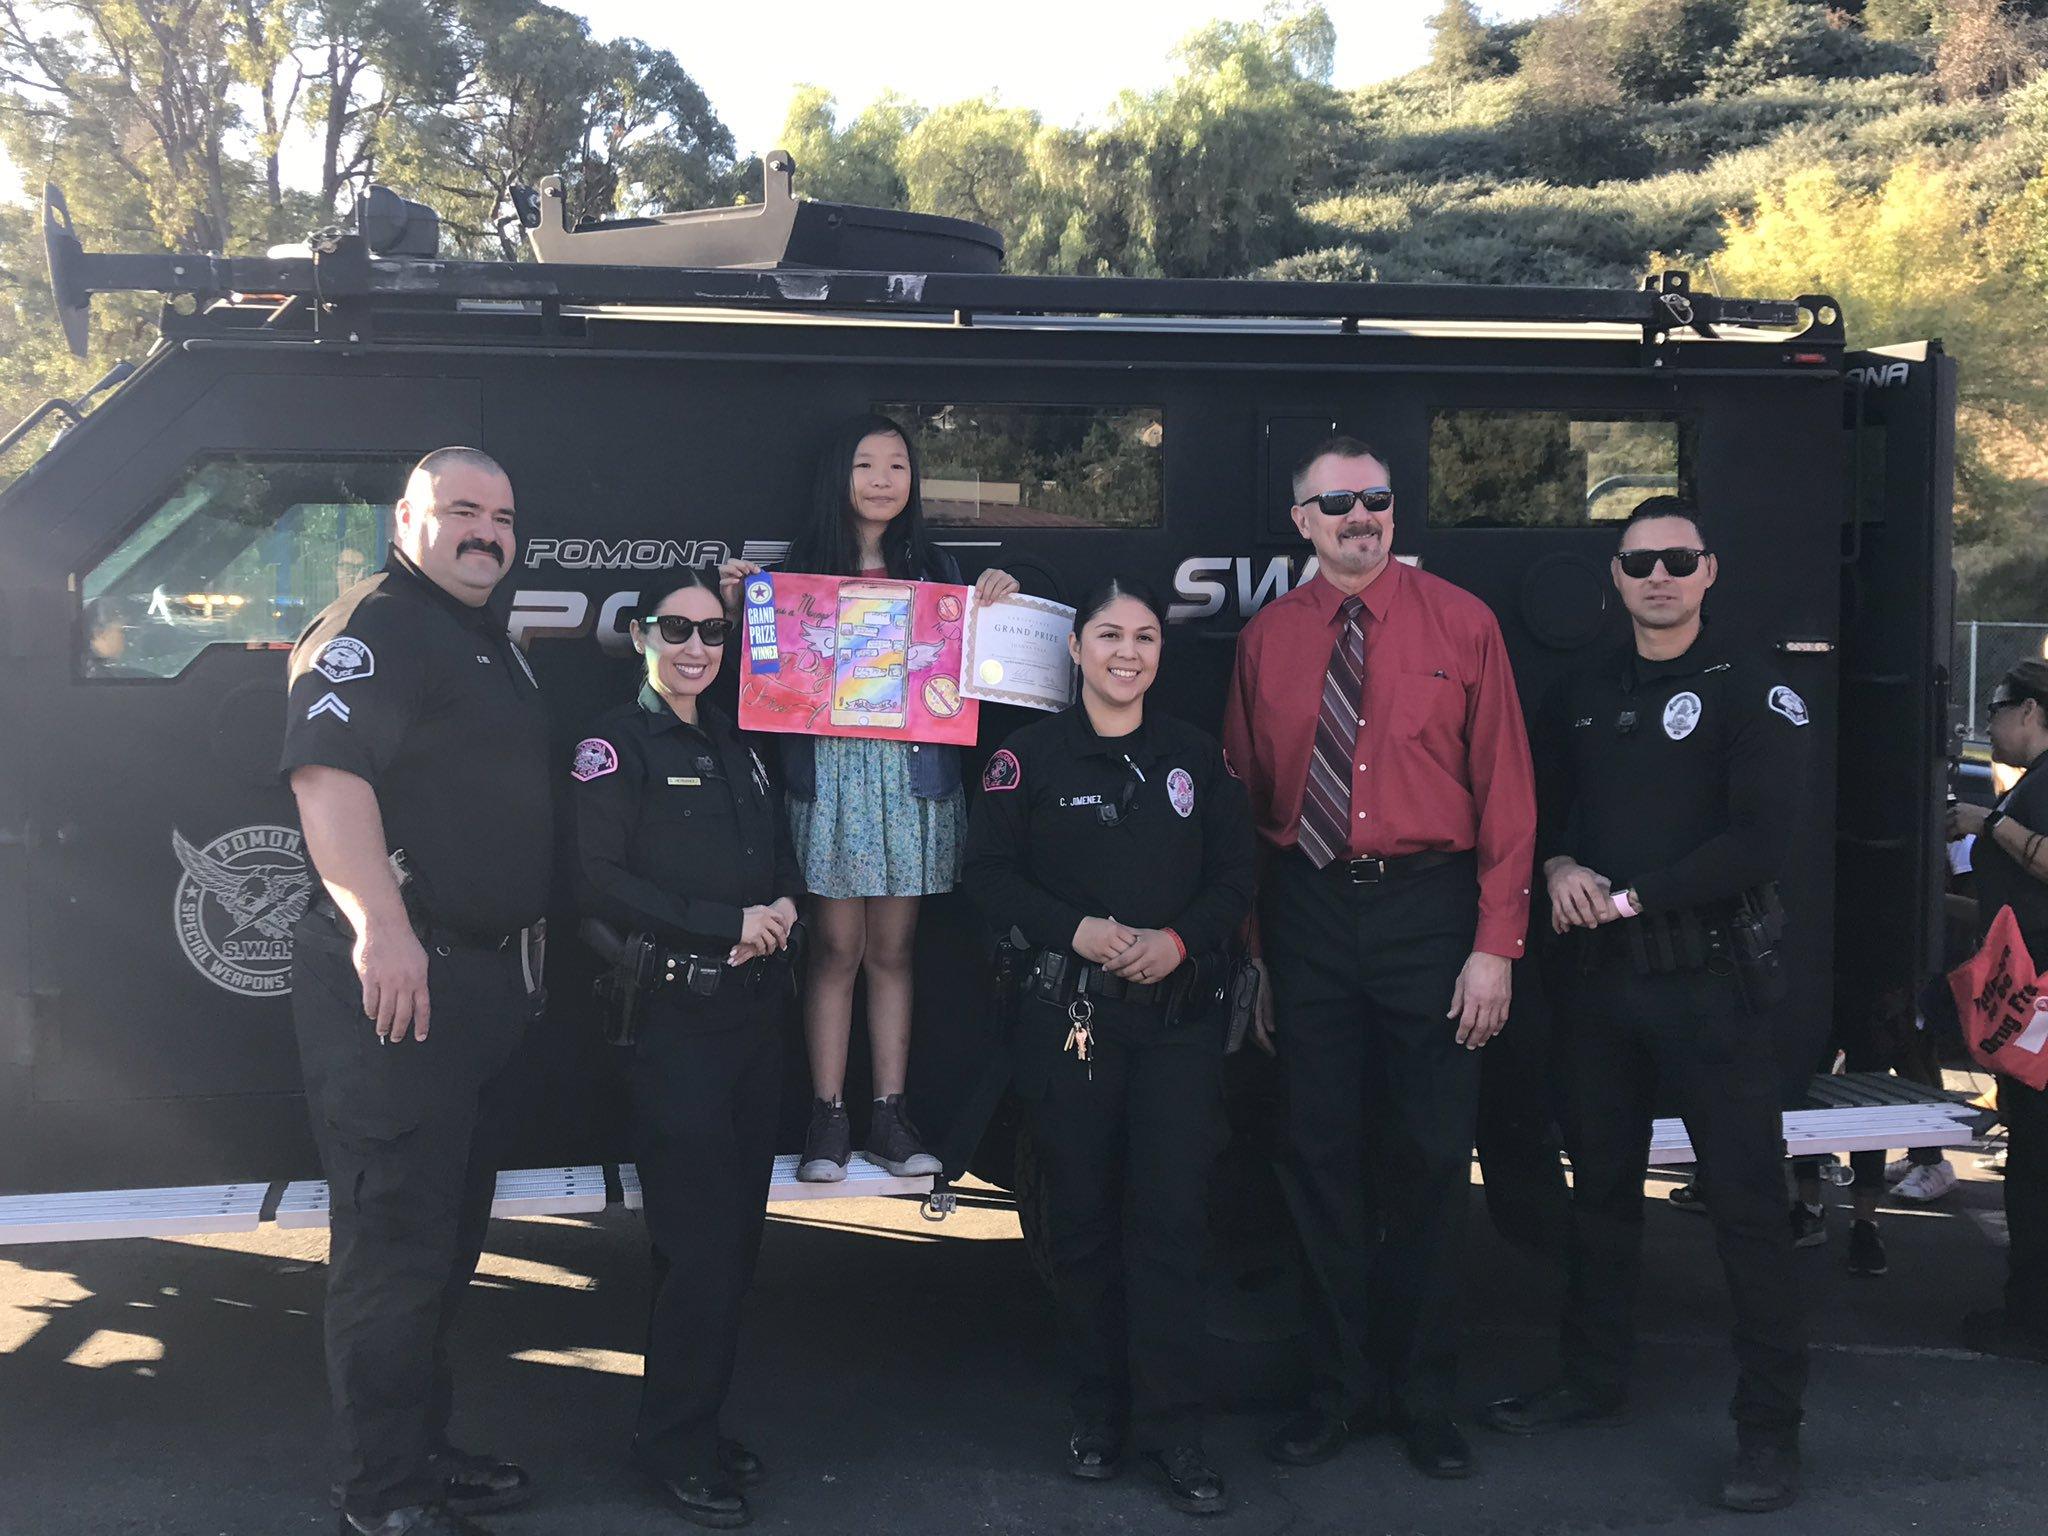 Joanna honored by the pomona police department, pictured is principal riffle and pomona police officers